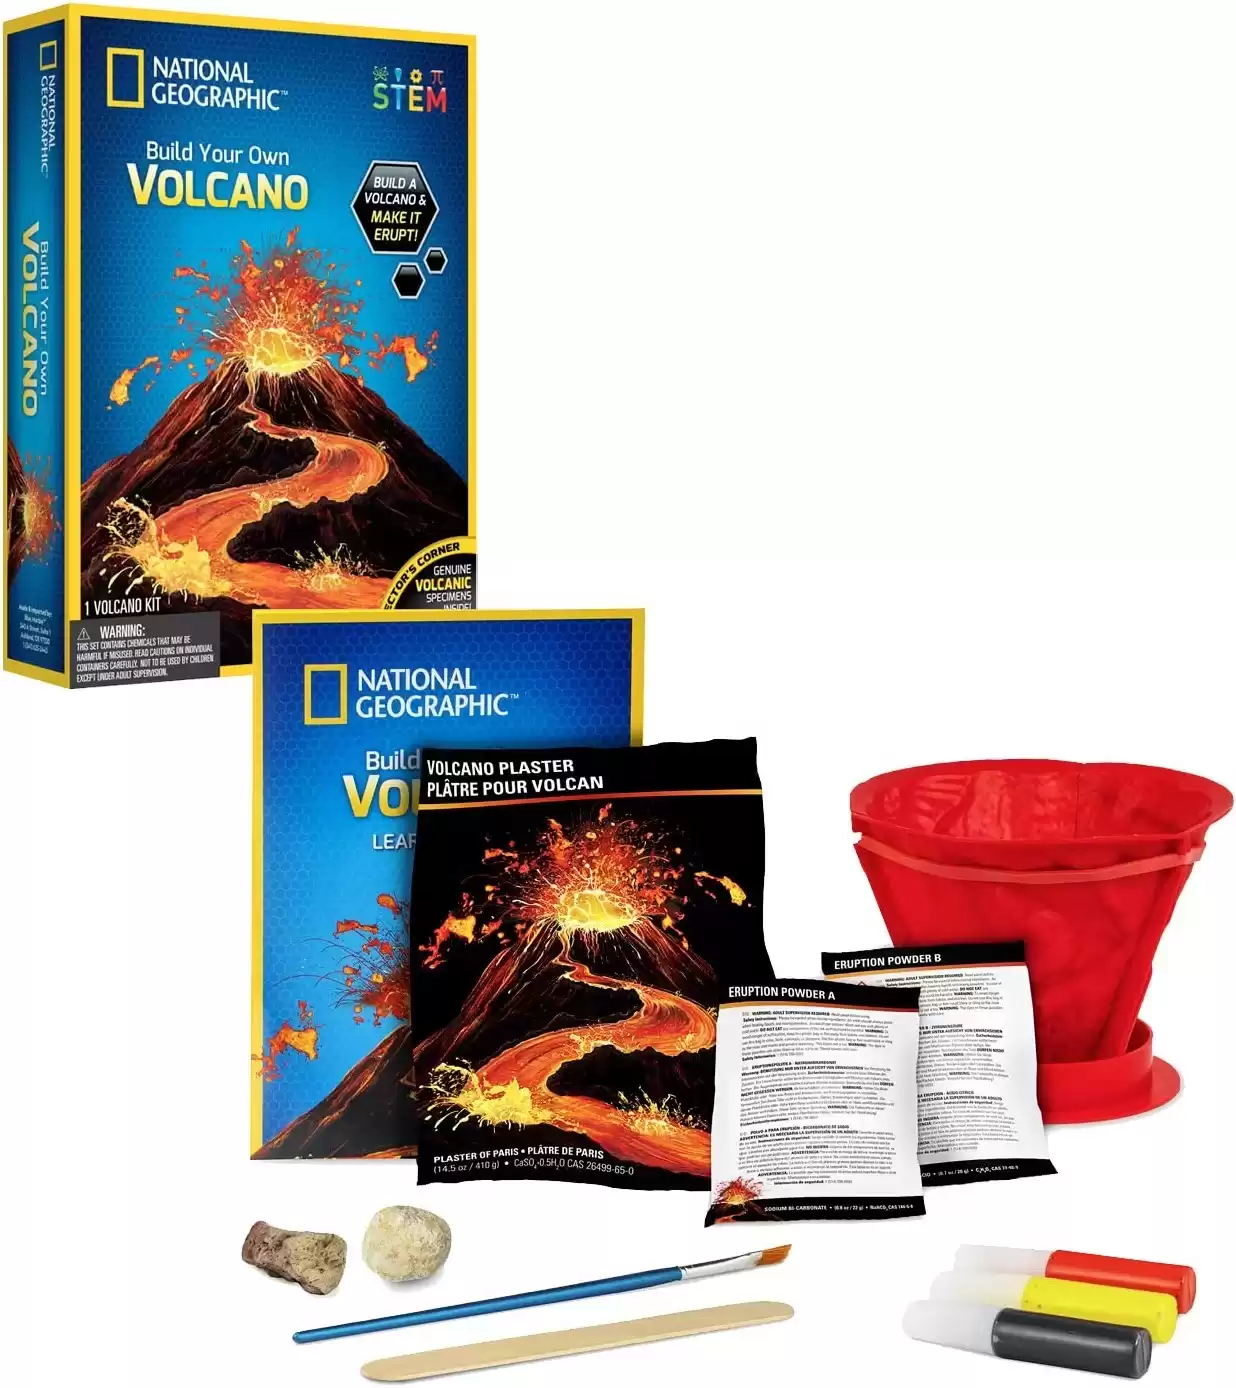 Build our own Volcano kit